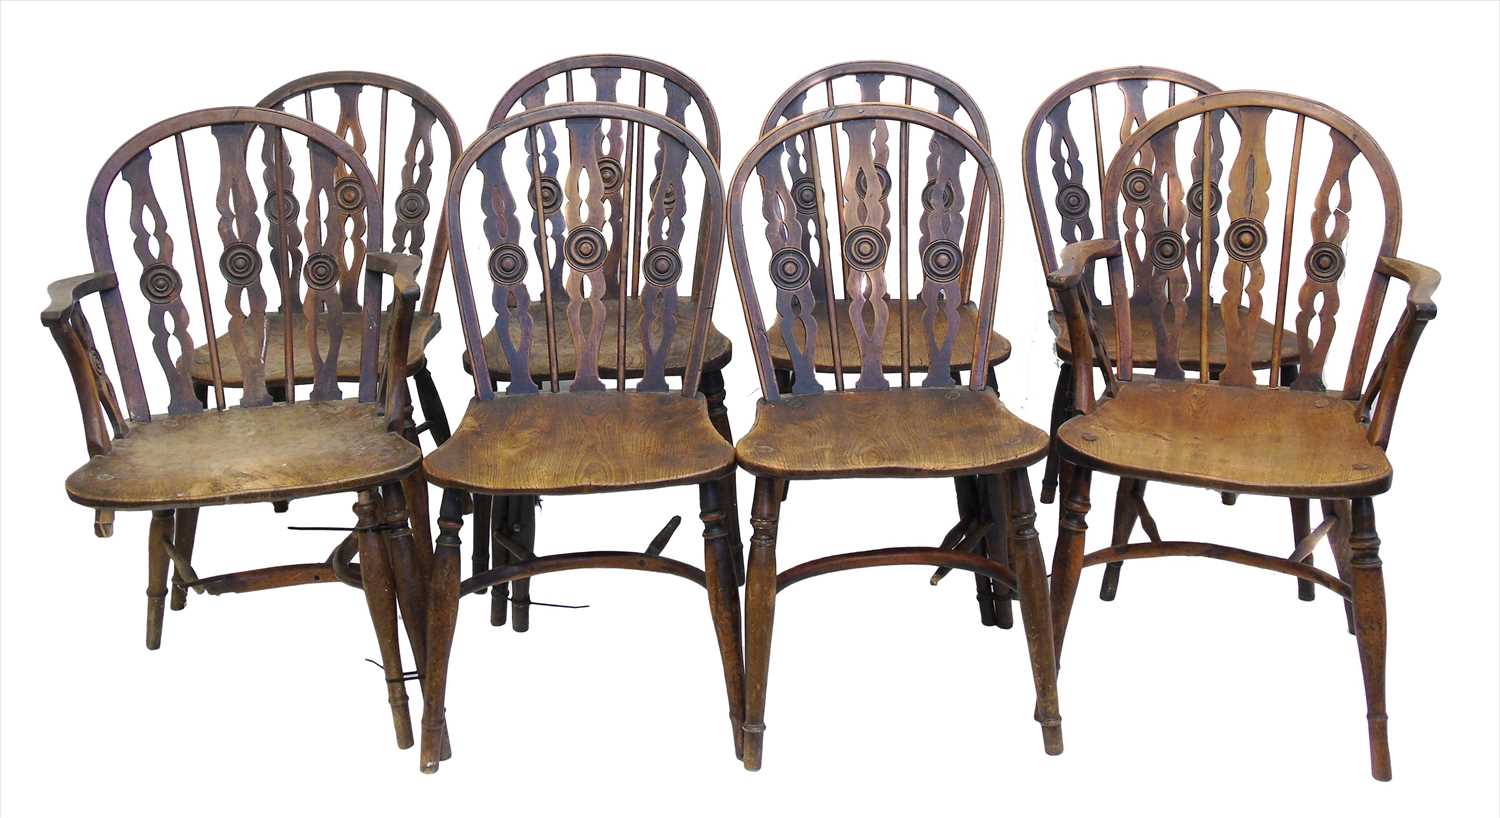 179 - Eight 19th century Windsor chairs by Prior